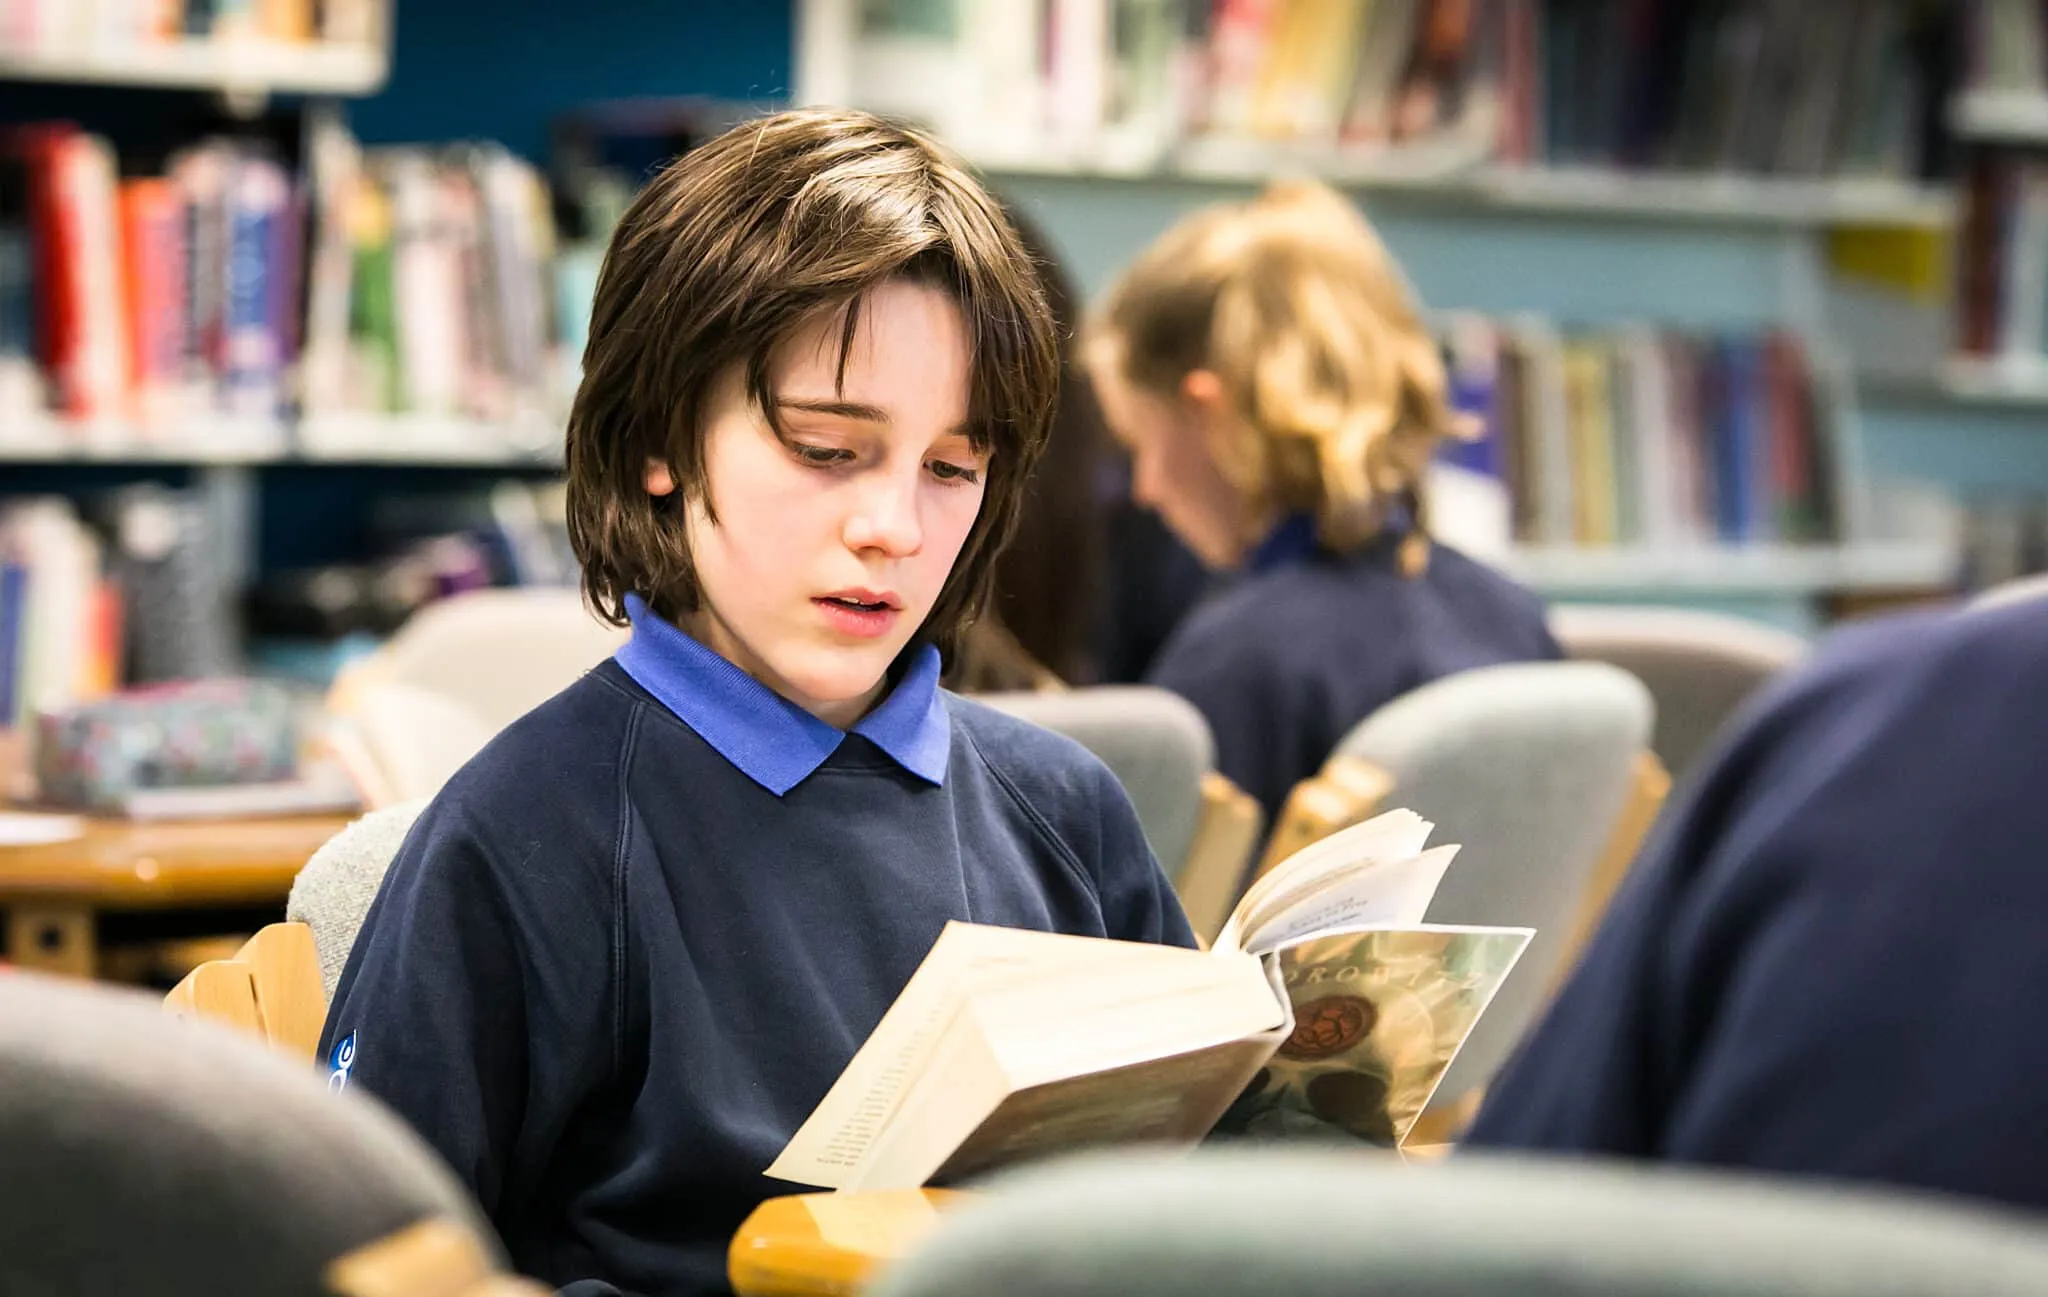 Hero image for the Favourite Books in Primary and Secondary Schools page